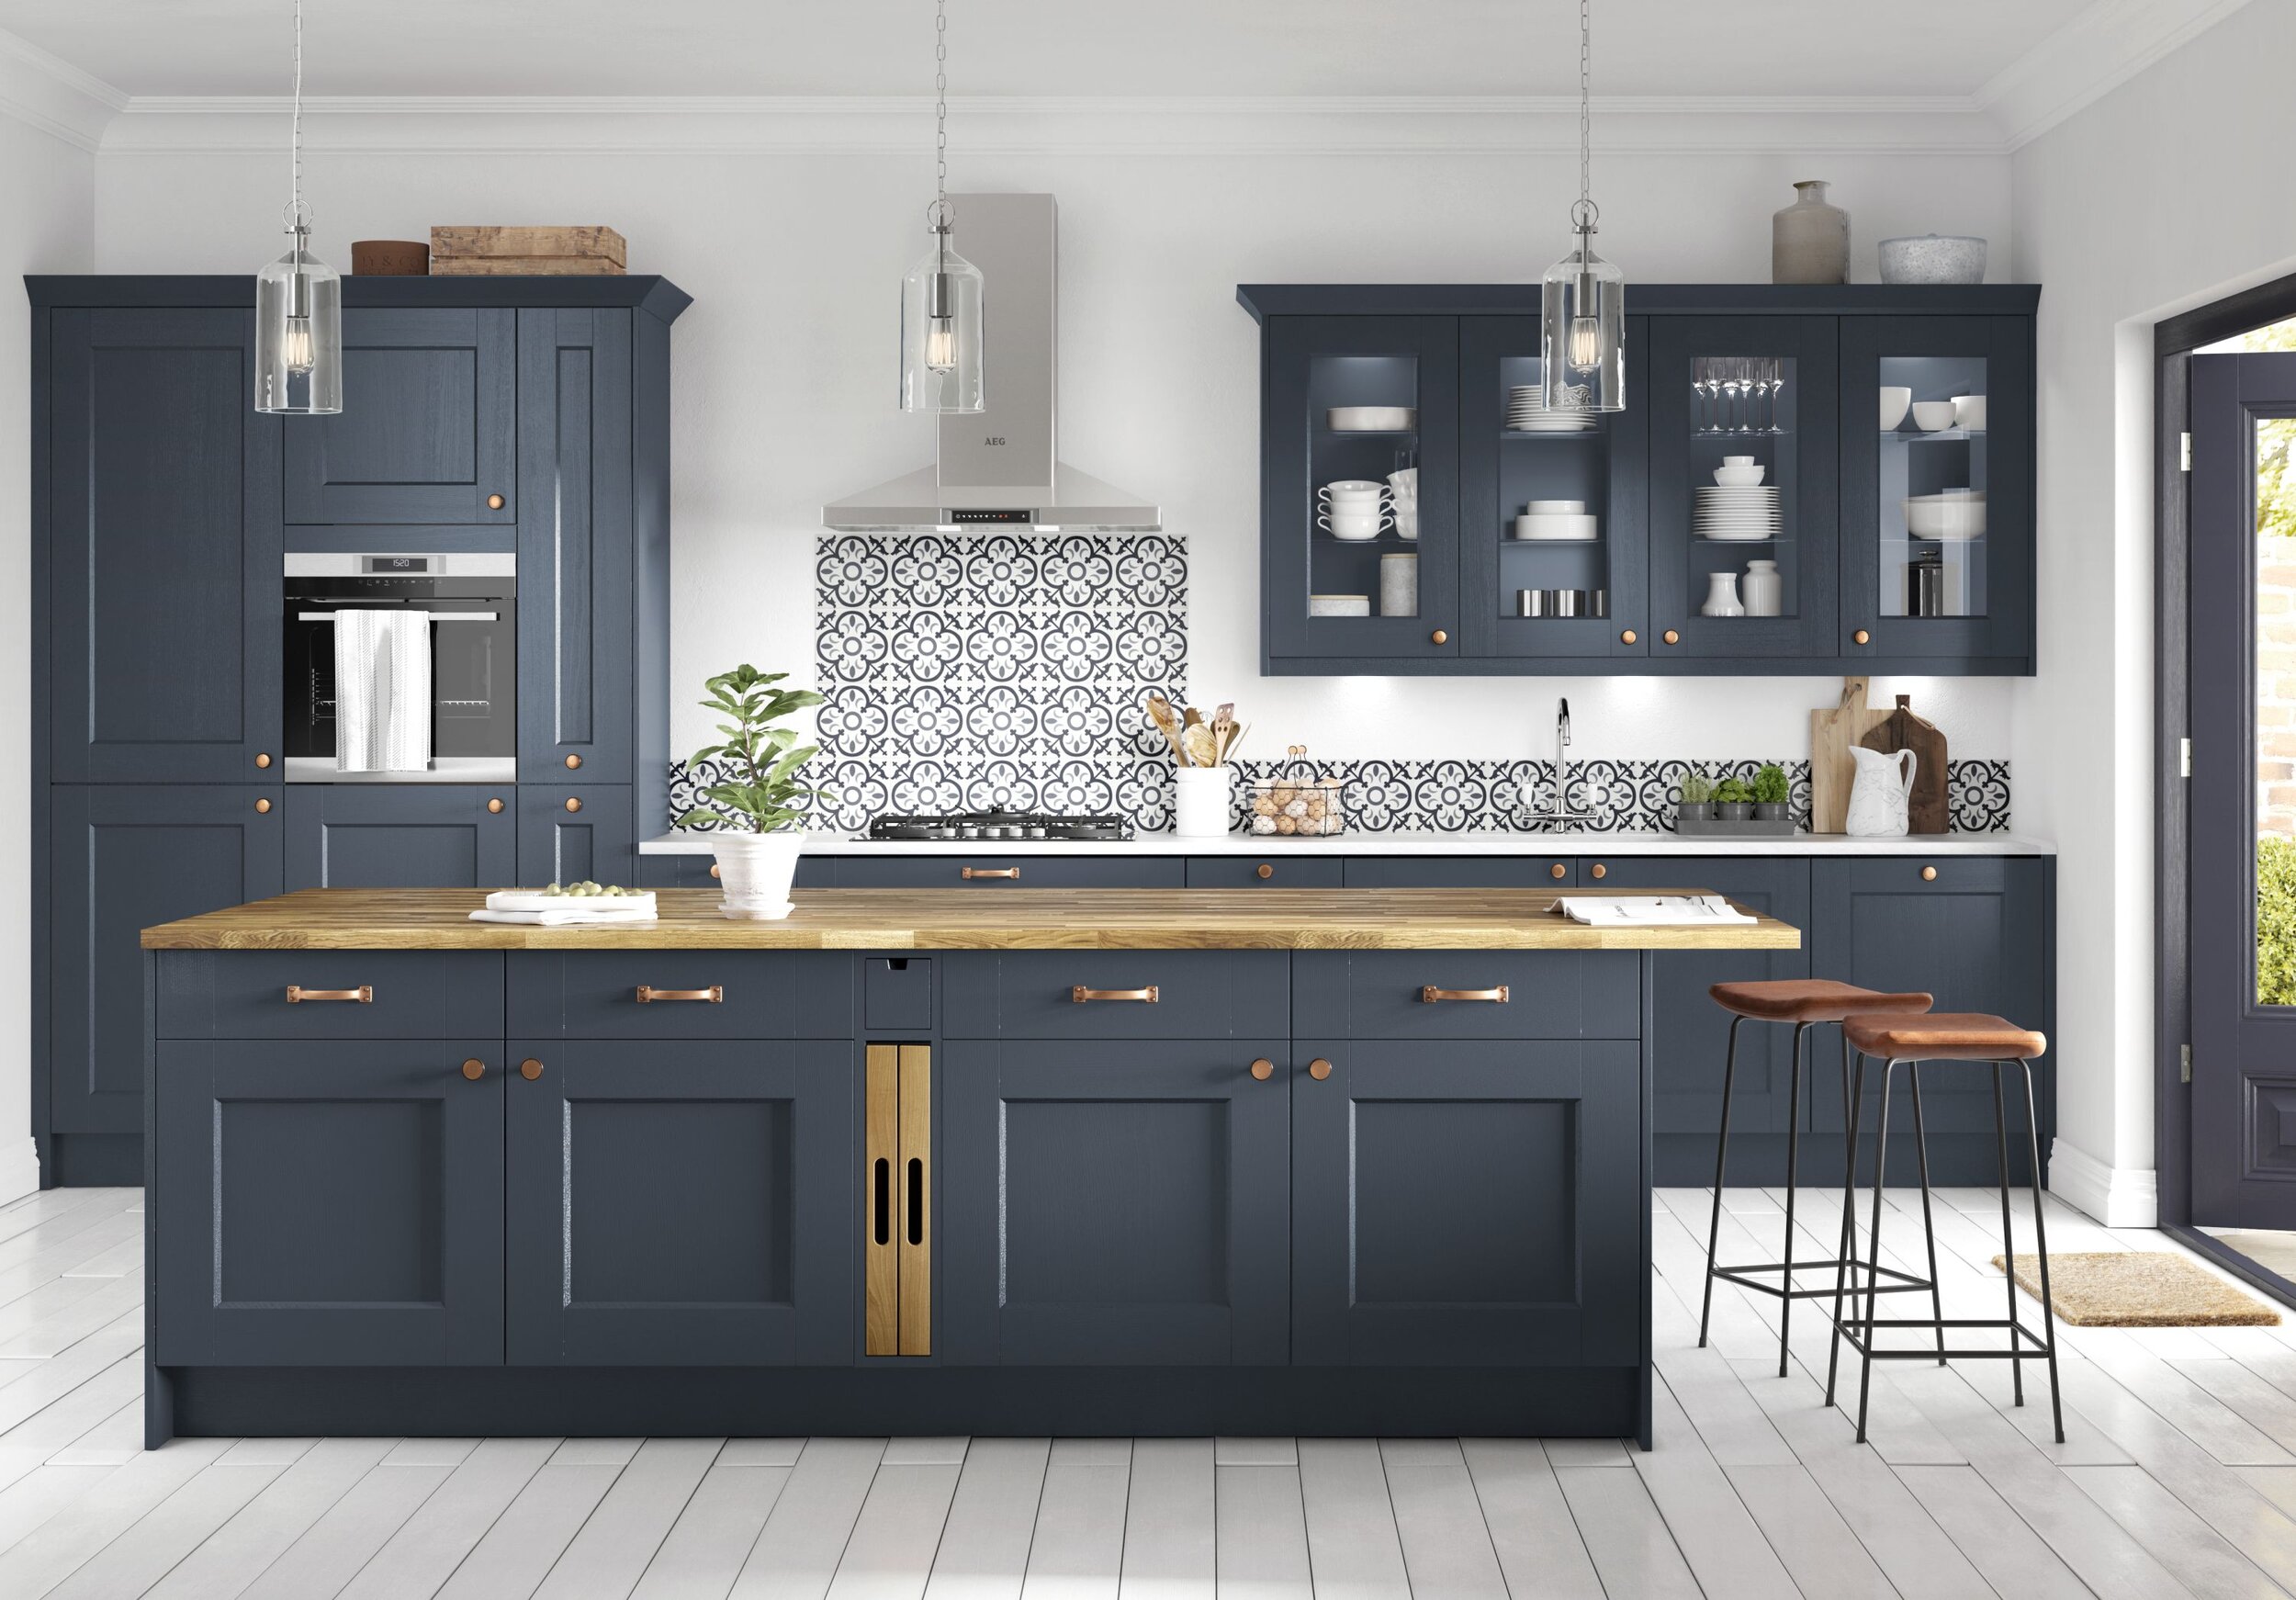 Simply Kitchens